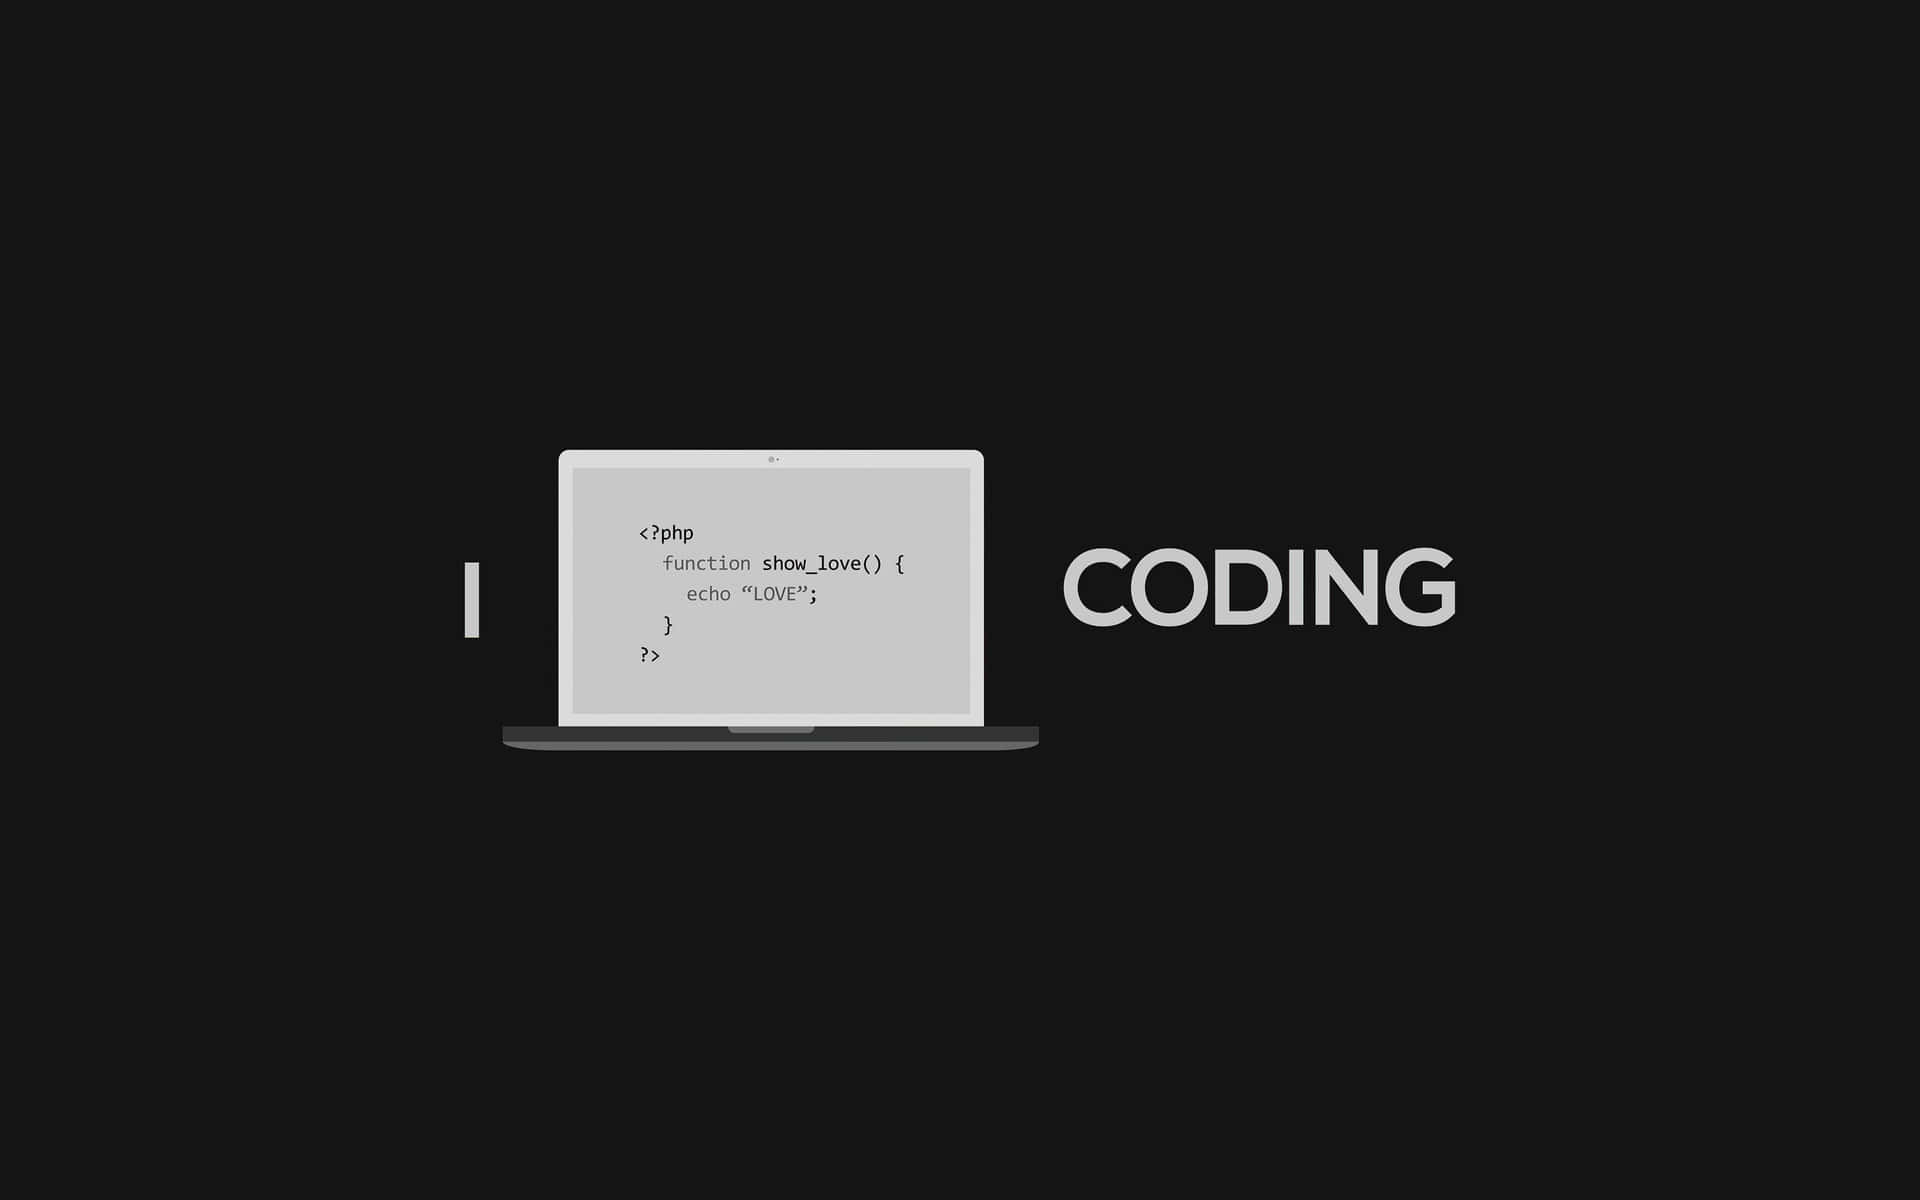 “The art of coding”